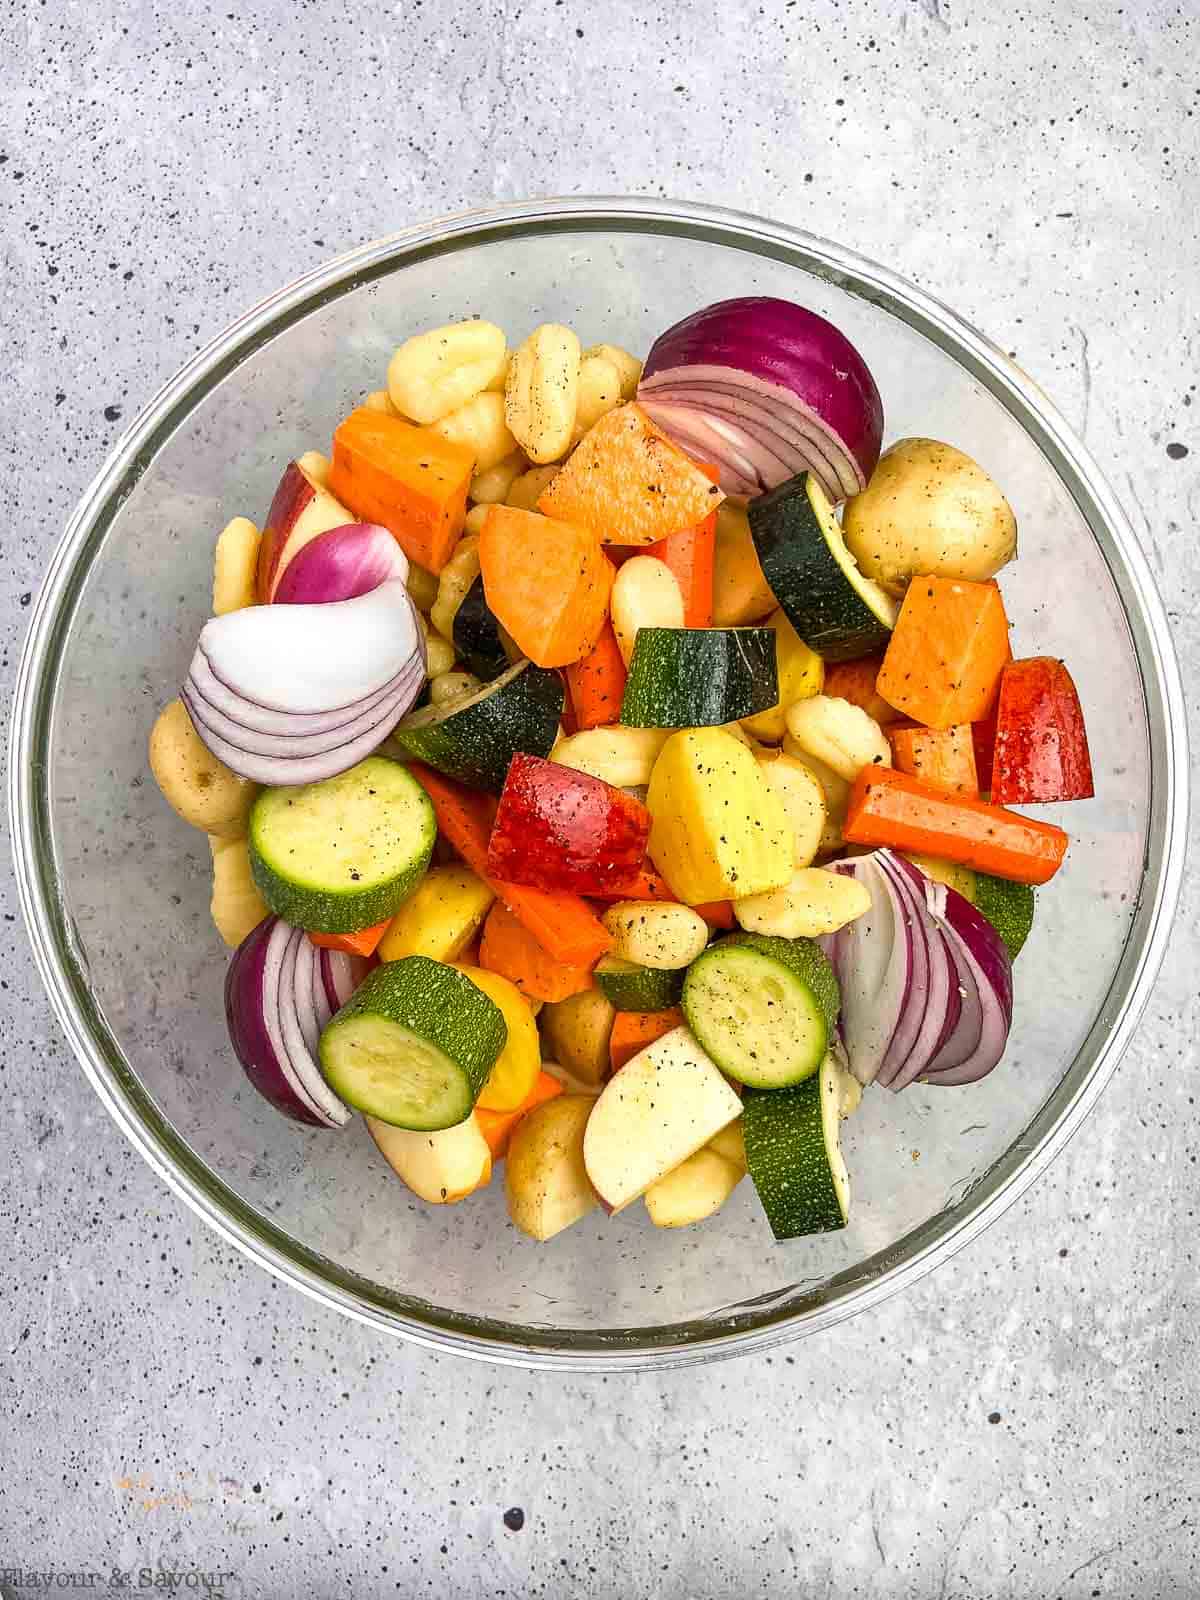 Colourful vegetables and gluten-free gnocchi in a glass bowl with olive oil.